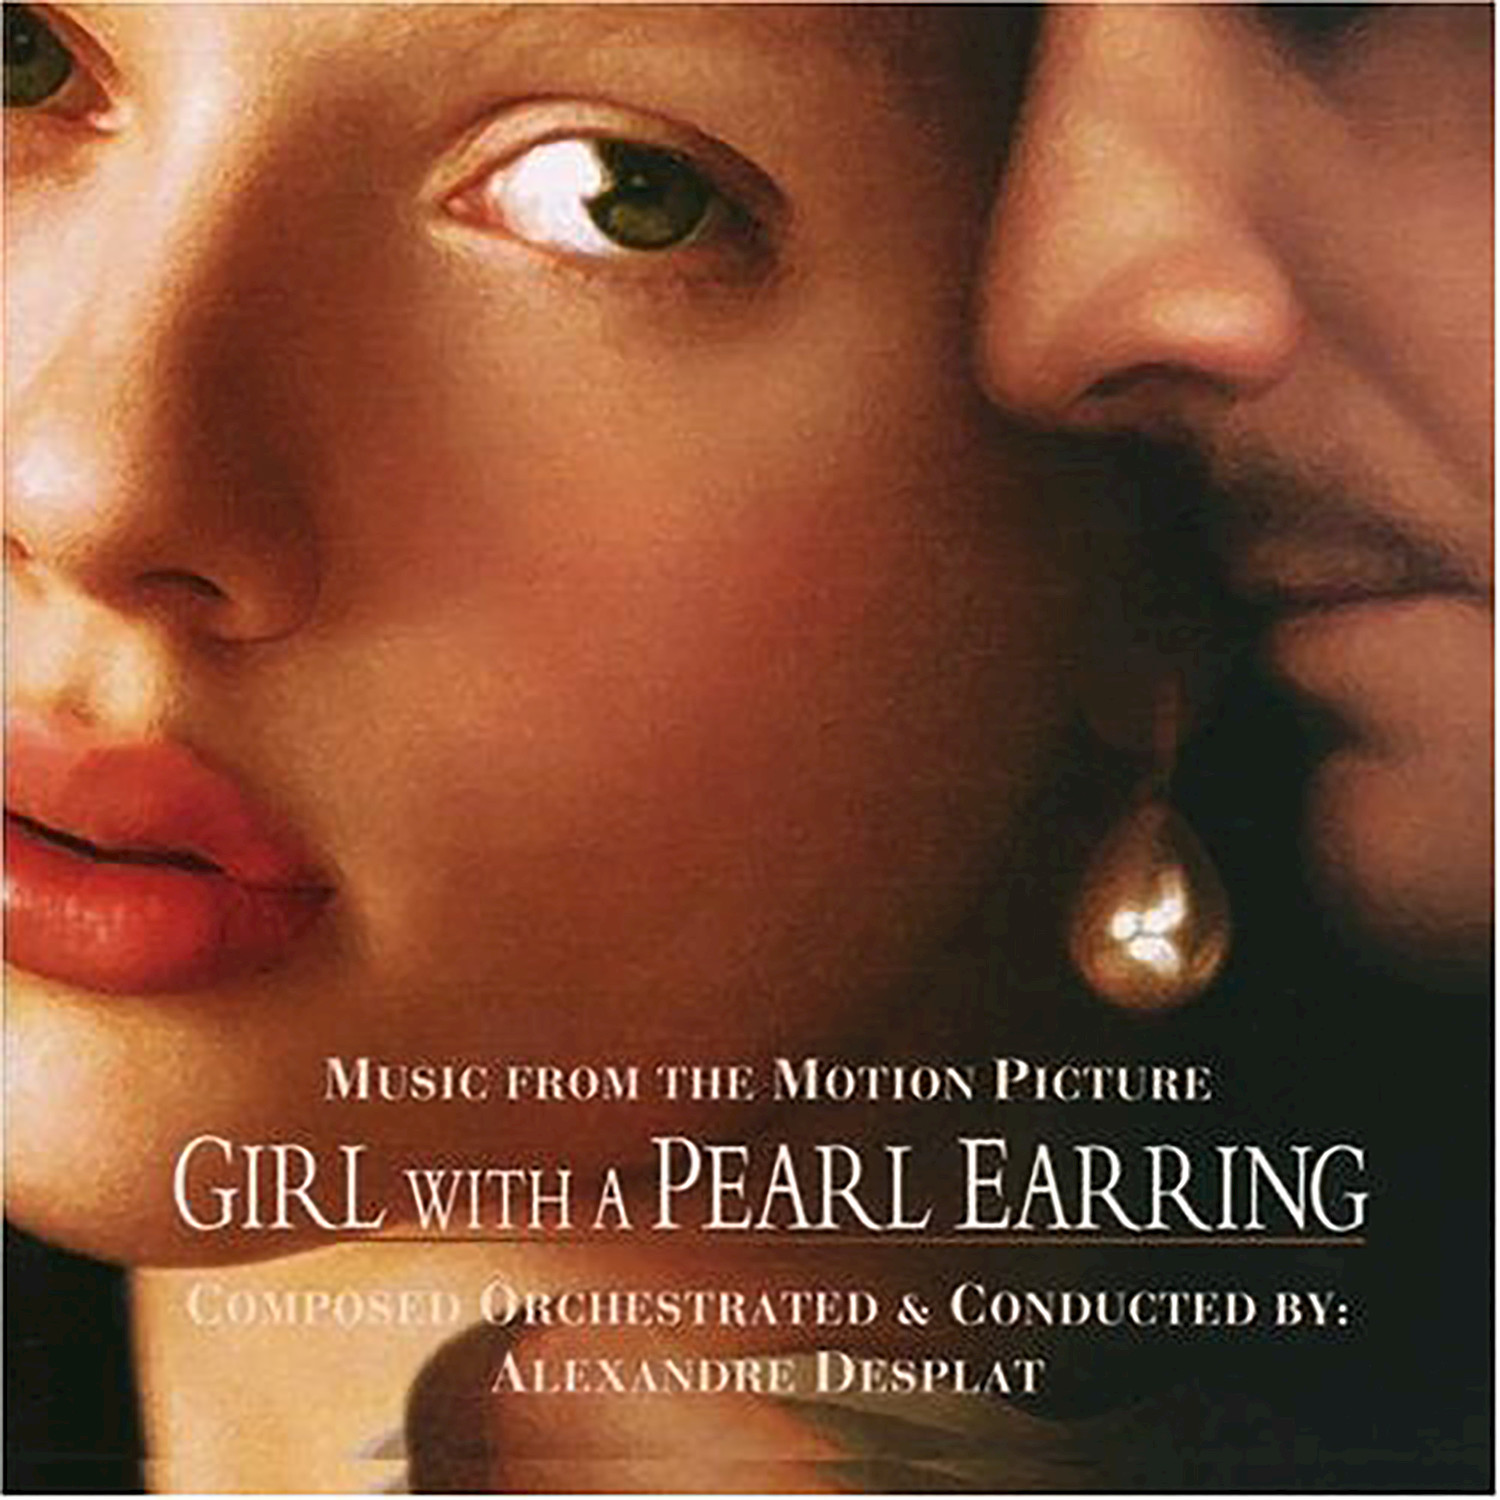 Girl with a Pearl Earring (Original Score)